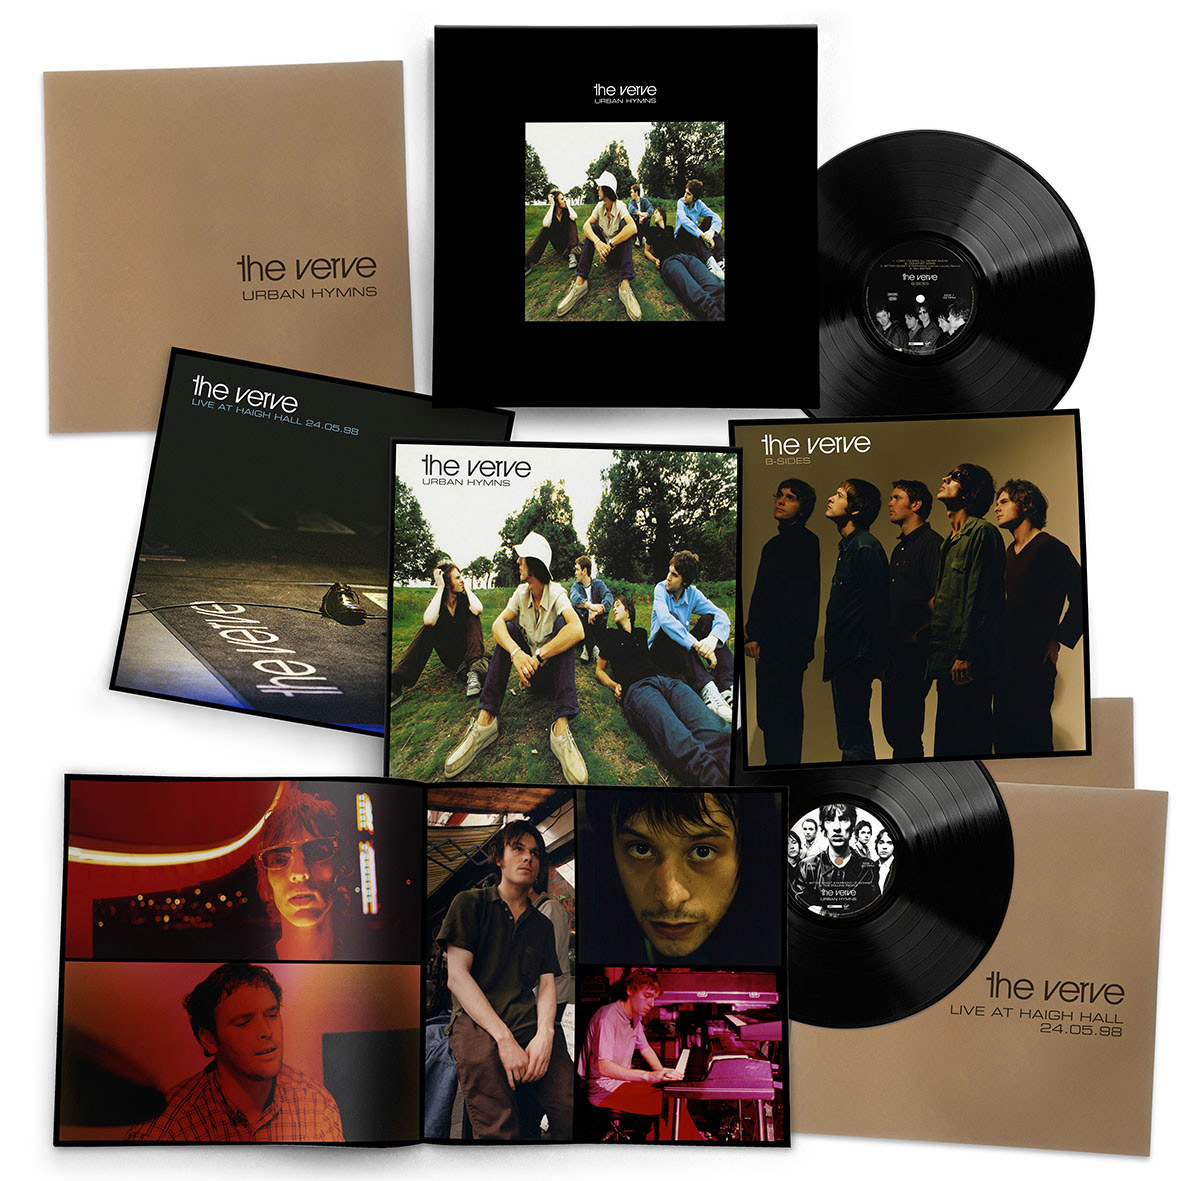 The Verve / Urban Hymns 5CD+DVD super deluxe edition and 6LP vinyl 